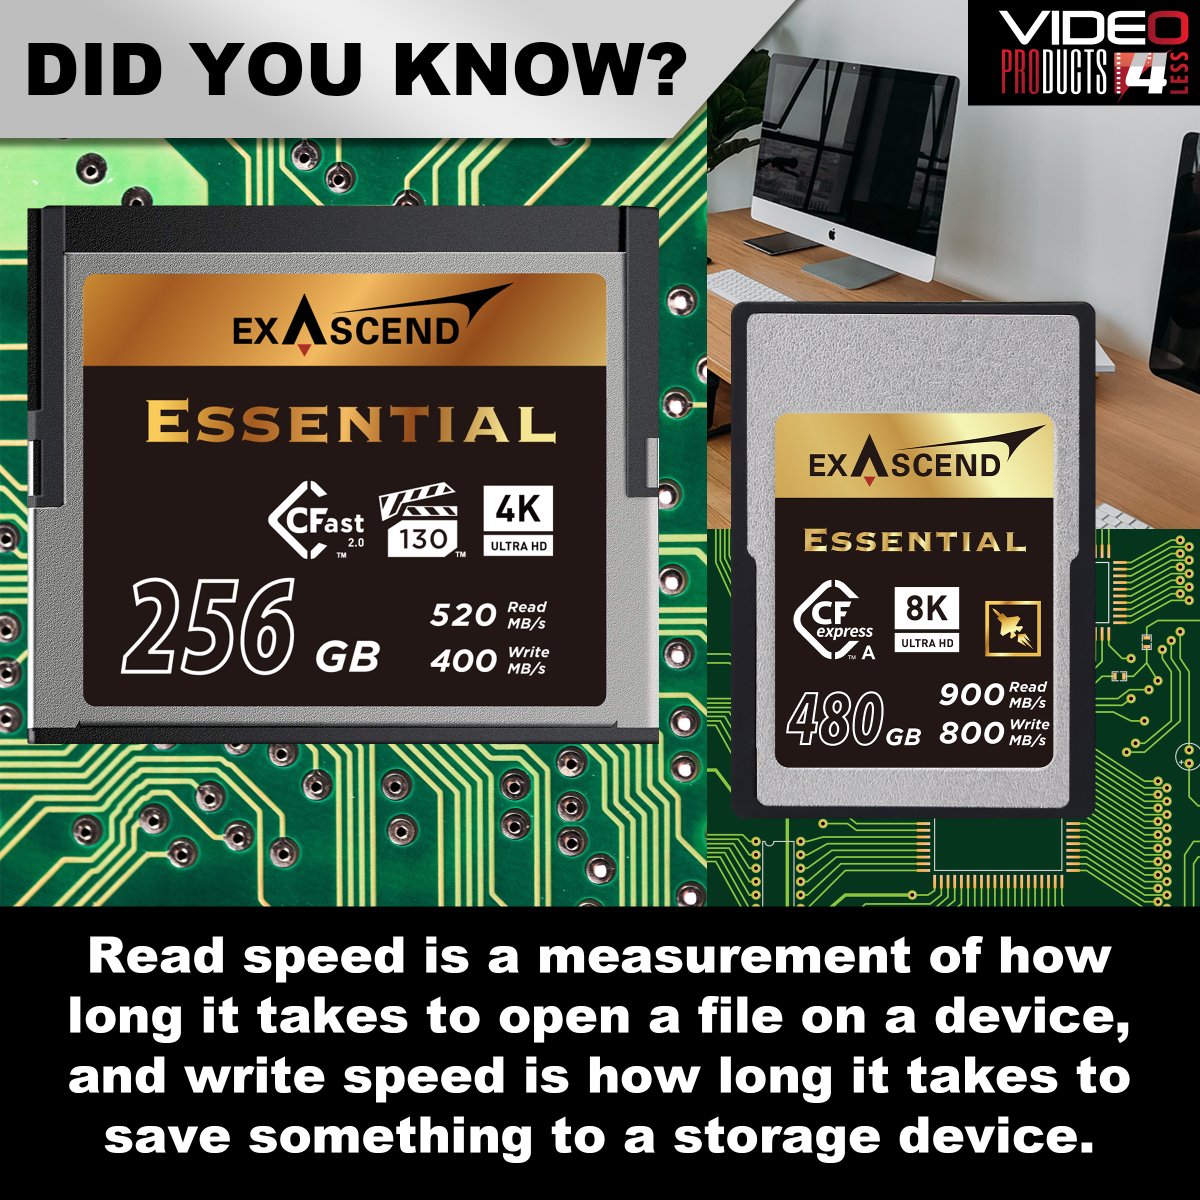 Imagine if you could read and write that fast!

#didyouknow #didyouknowdaily #trivia #techfacts #techtrivia #themoreyouknow #Exascend #readspeed #writespeed #cfast #cfexpress #memorycards #storagedrives #filestorage #filmmaking #storage #footage #audio #video #filmequipment